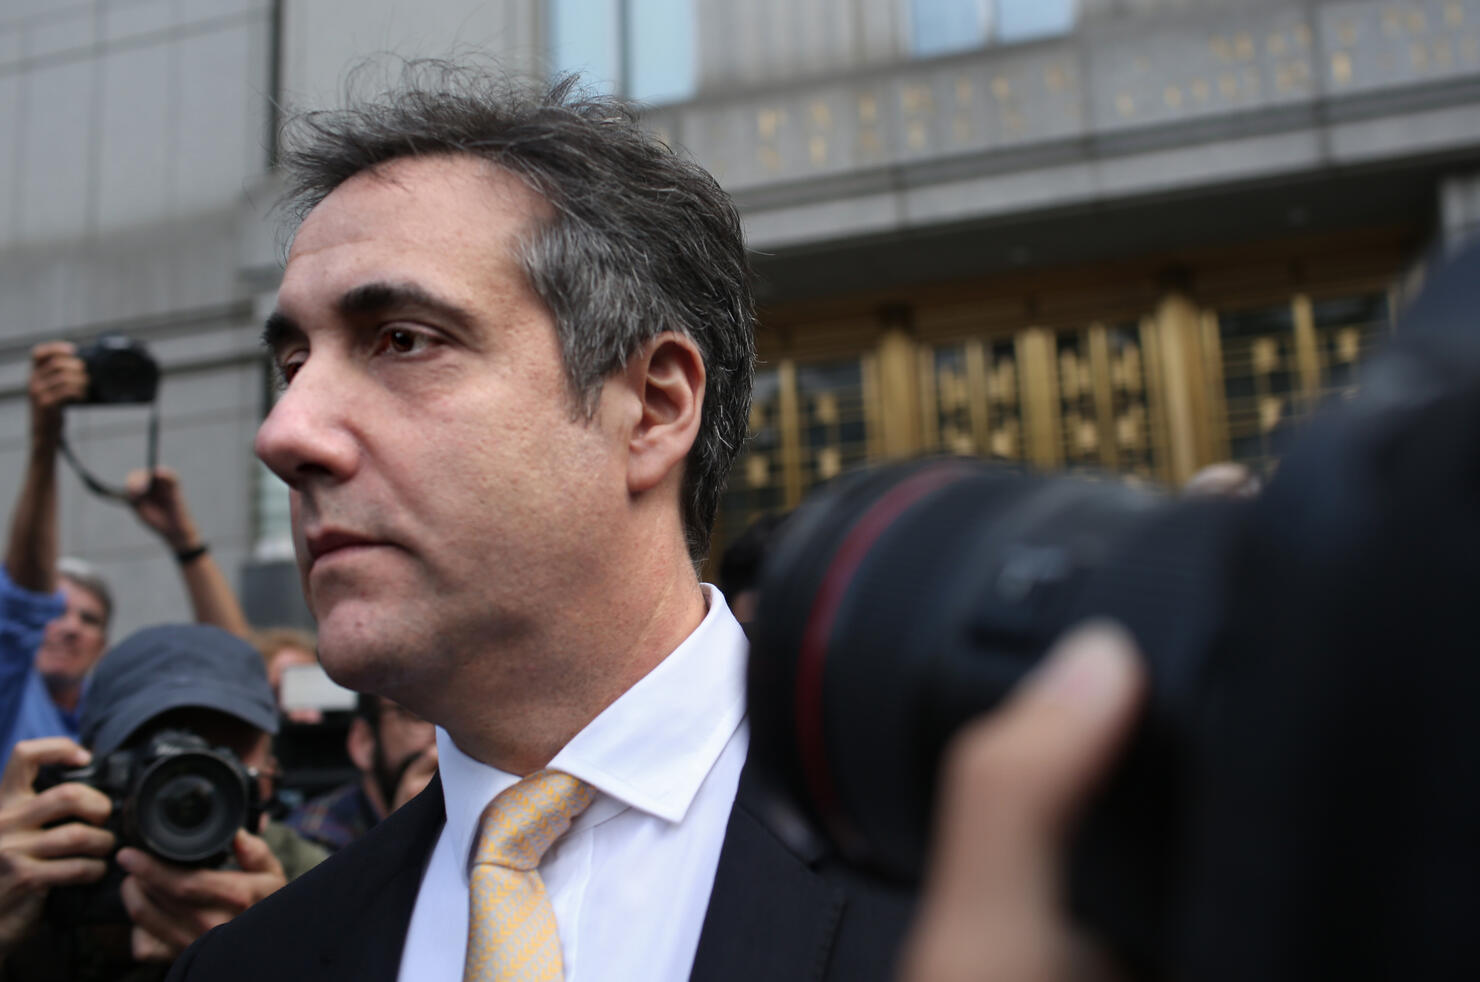 Michael Cohen delaying testimony to congress